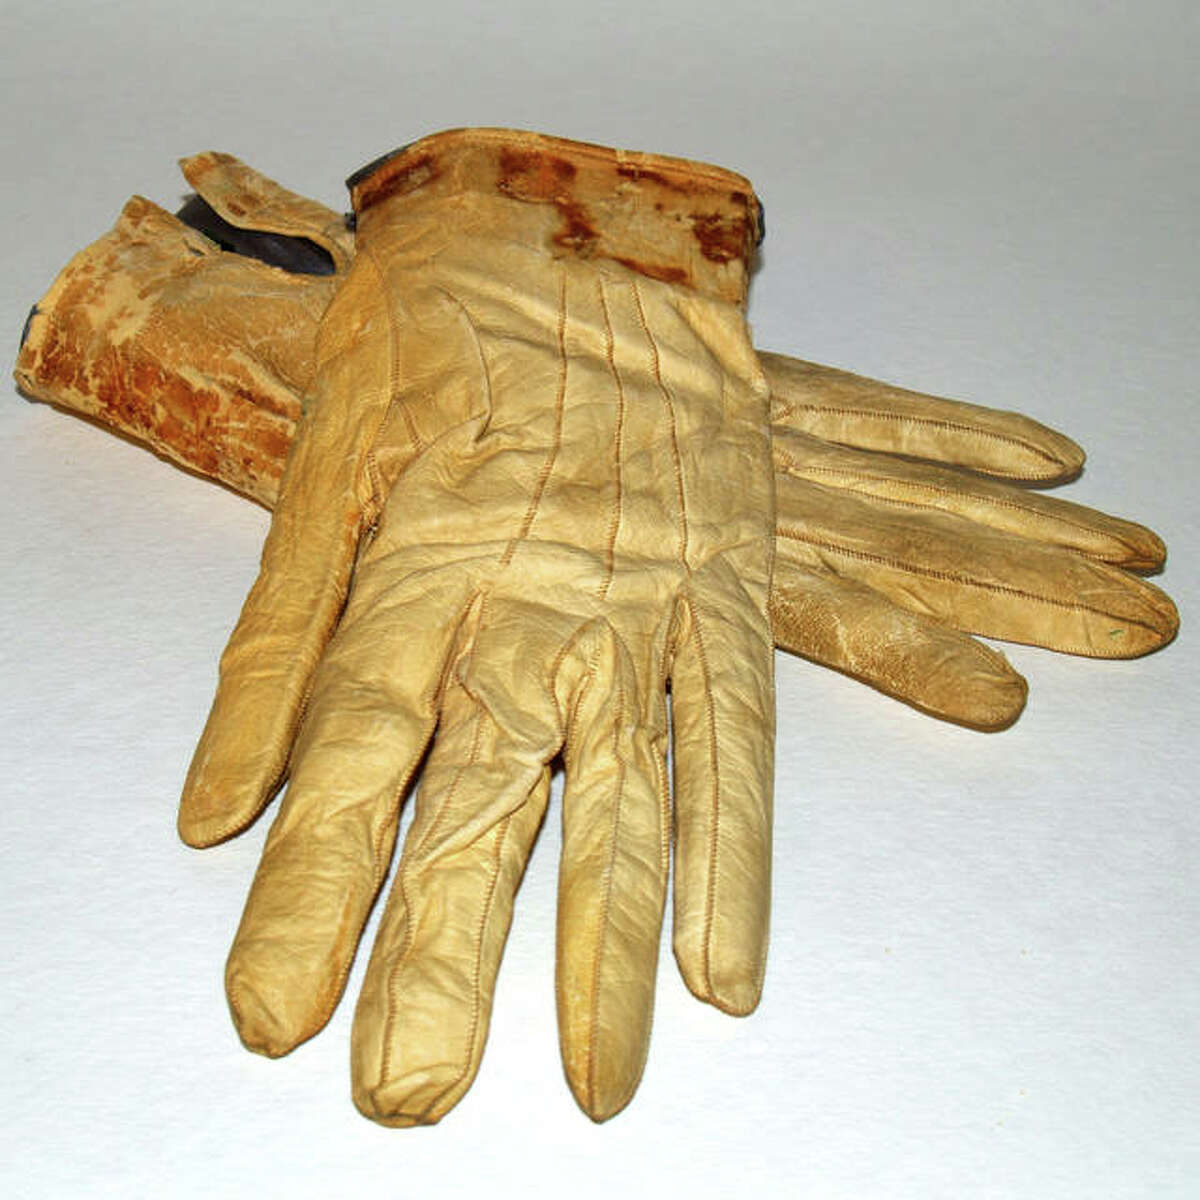 These blood-stained gloves that were in Abraham Lincoln’s pocket when he died are among the artifacts the Abraham Lincoln Presidential Library Foundation borrowed $23 million in 2007 to purchase.